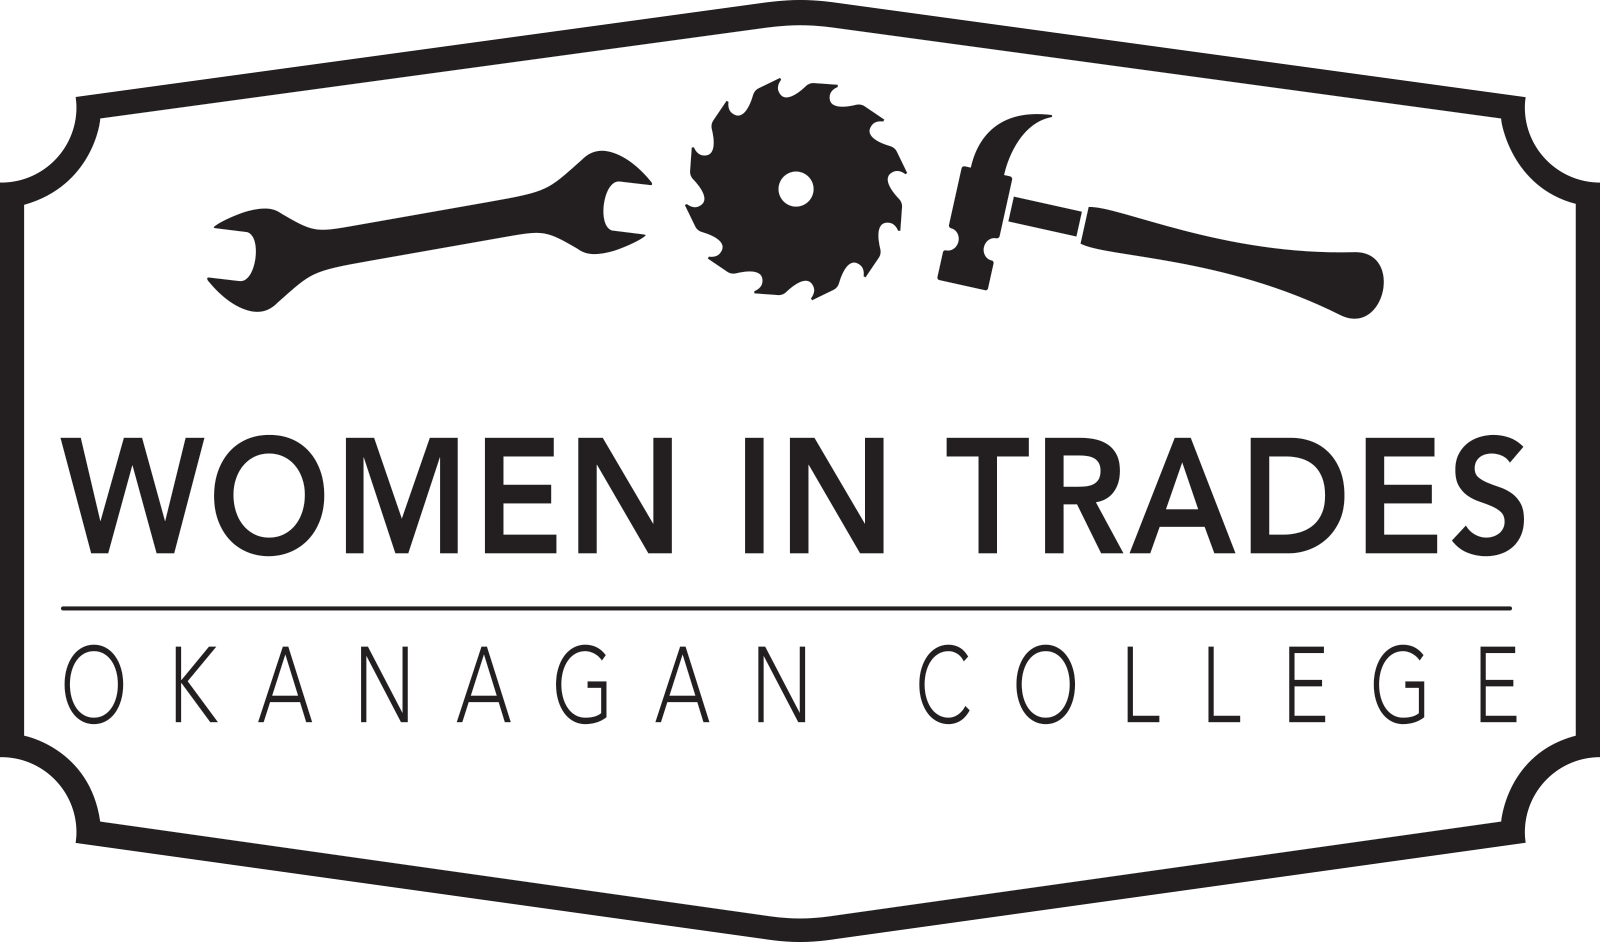 Women in Trades | Okanagan College text along with graphic of a wrench, saw blade and a hammer